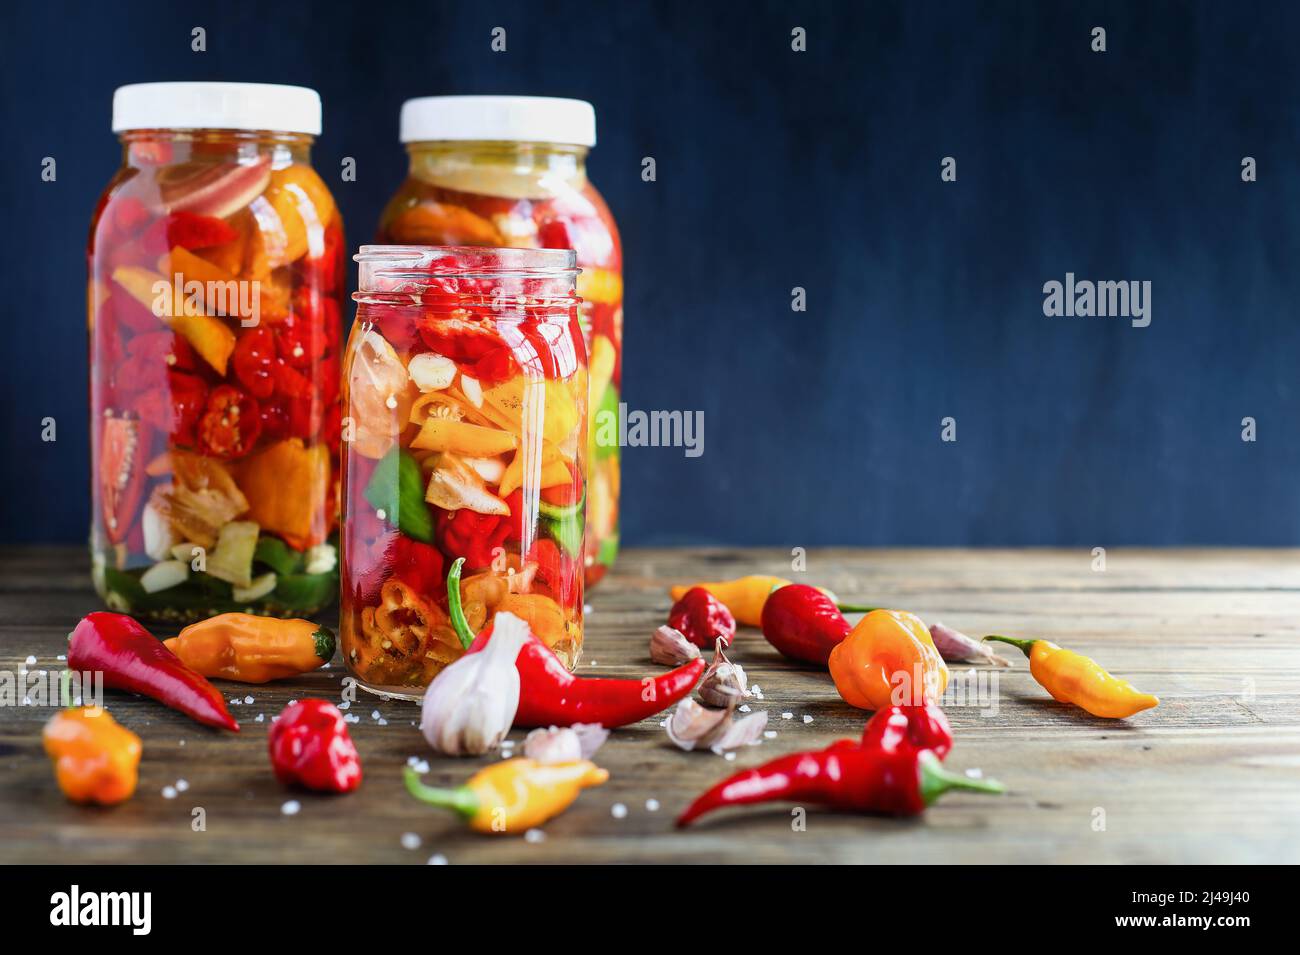 Variety of peppers, spices and garlic in a mason jars fermenting, a rich source of probiotics, to make homemade hot sauce over a rustic background. Stock Photo